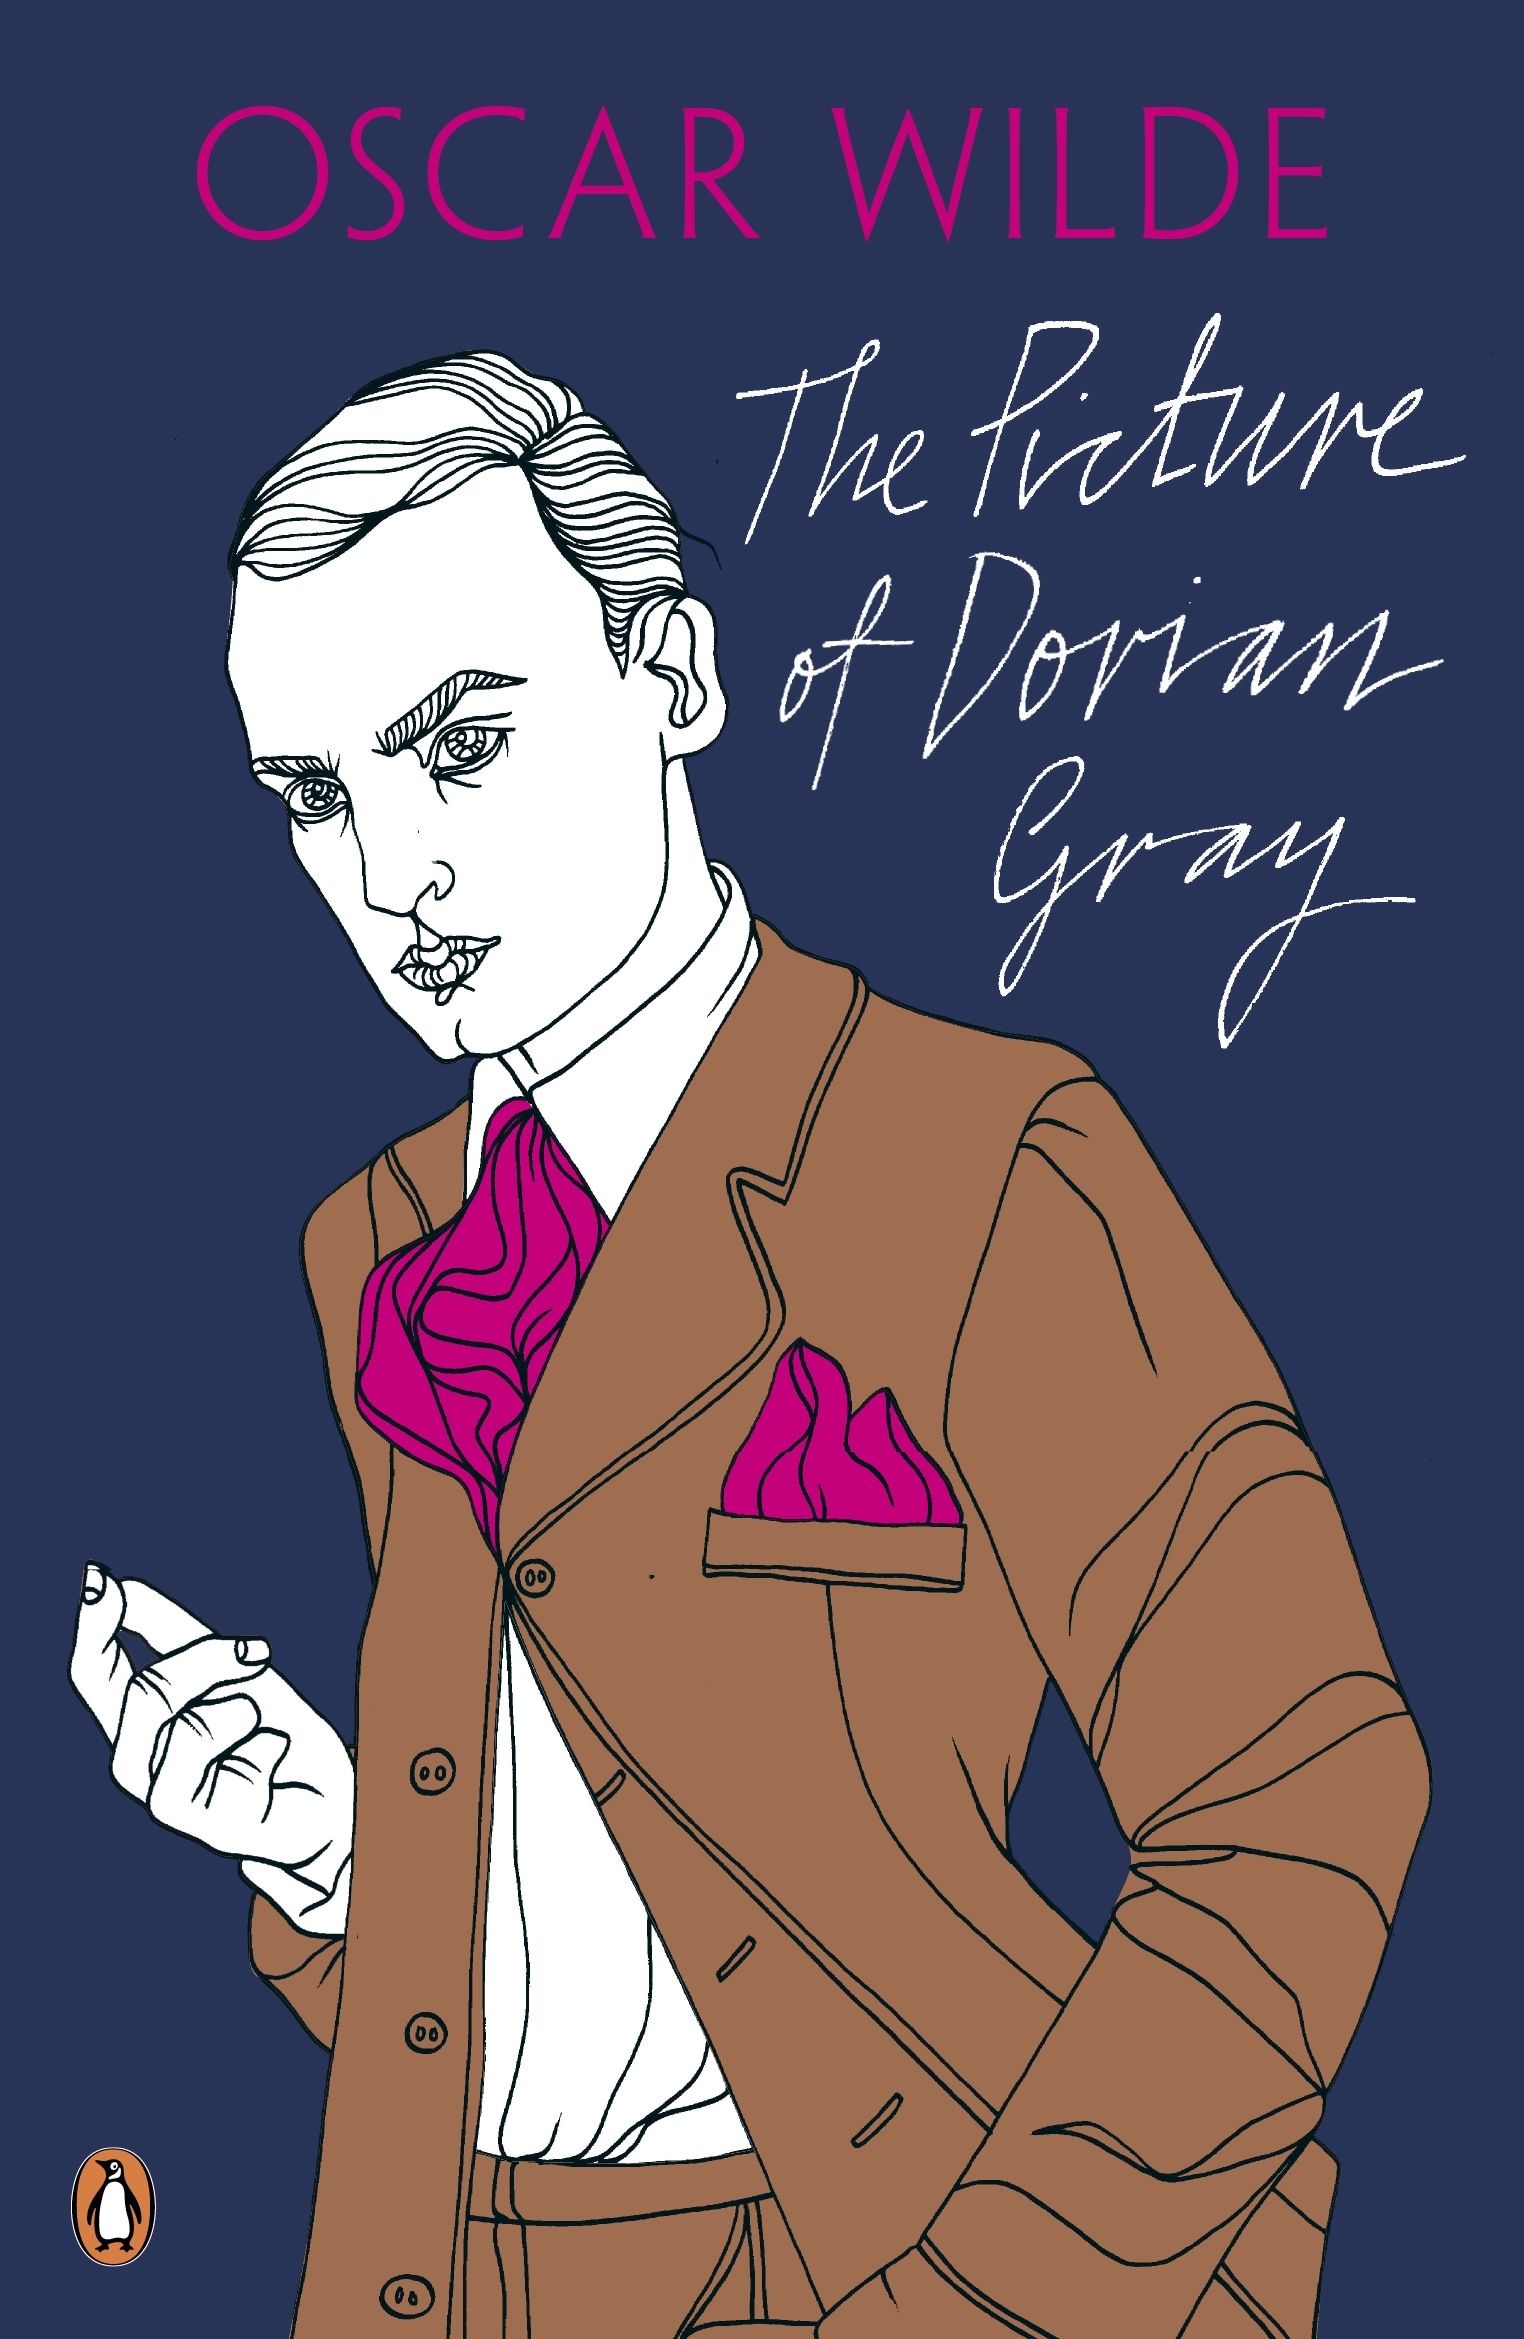 Book “The Picture of Dorian Gray” by Oscar Wilde — April 1, 2010